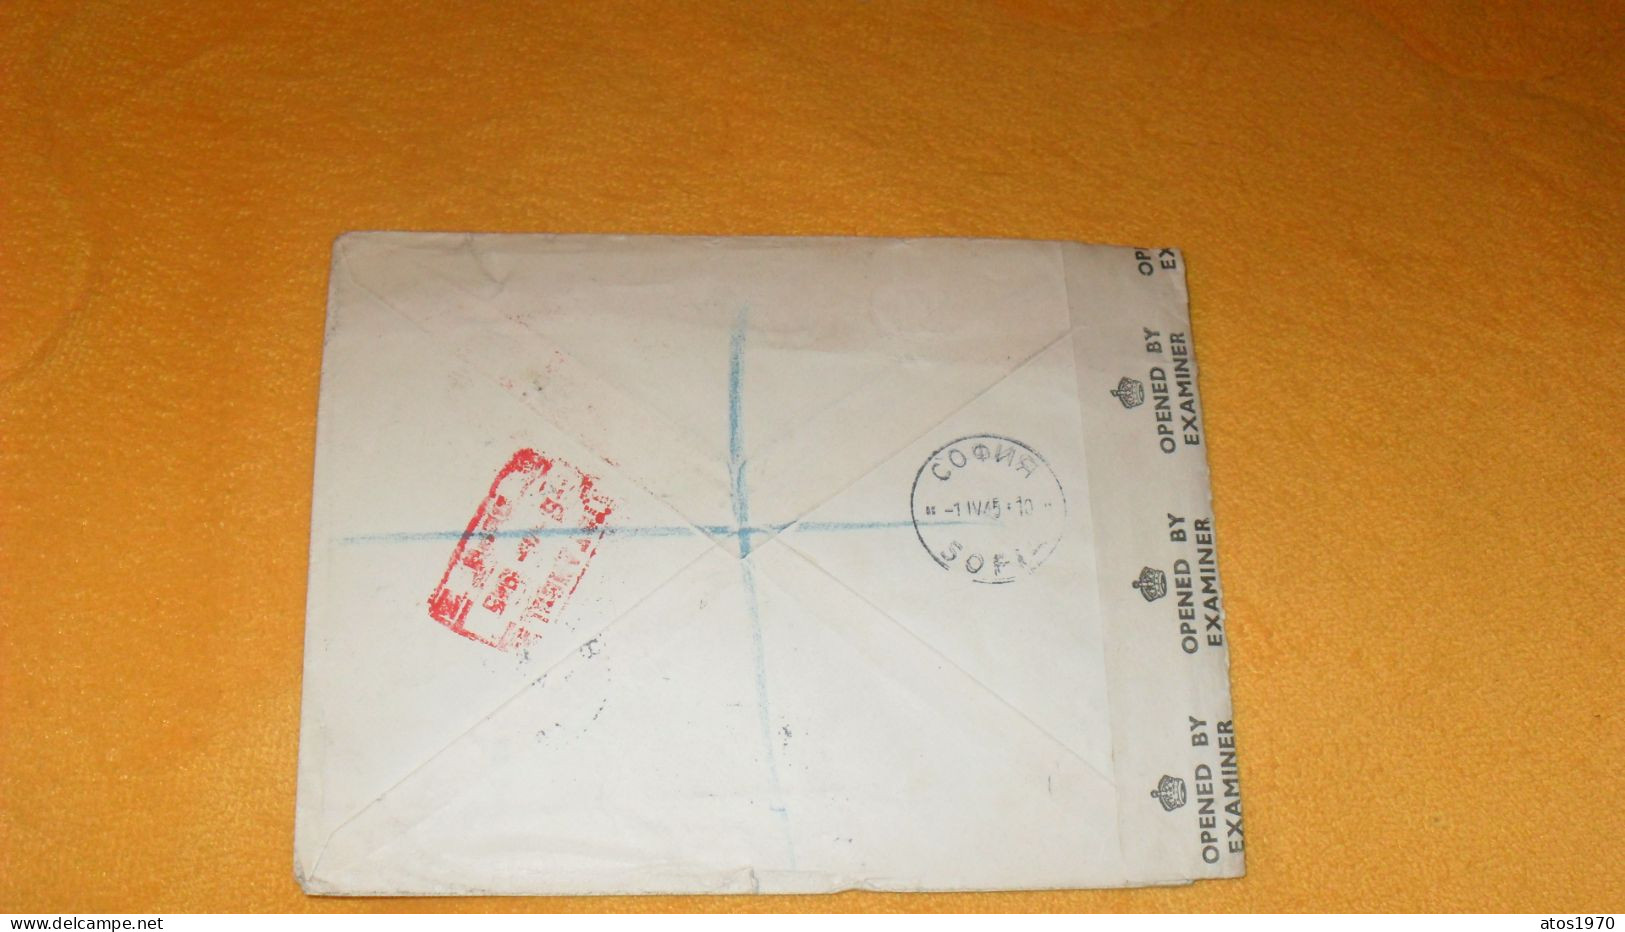 ENVELOPPE ANCIENNE DE 1945../ GEORGES T. PETROFF & CIE IMPORTATION...VARNA BULGARIE OPENED BY EXA..CACHETS + TIMBRES X3 - Storia Postale